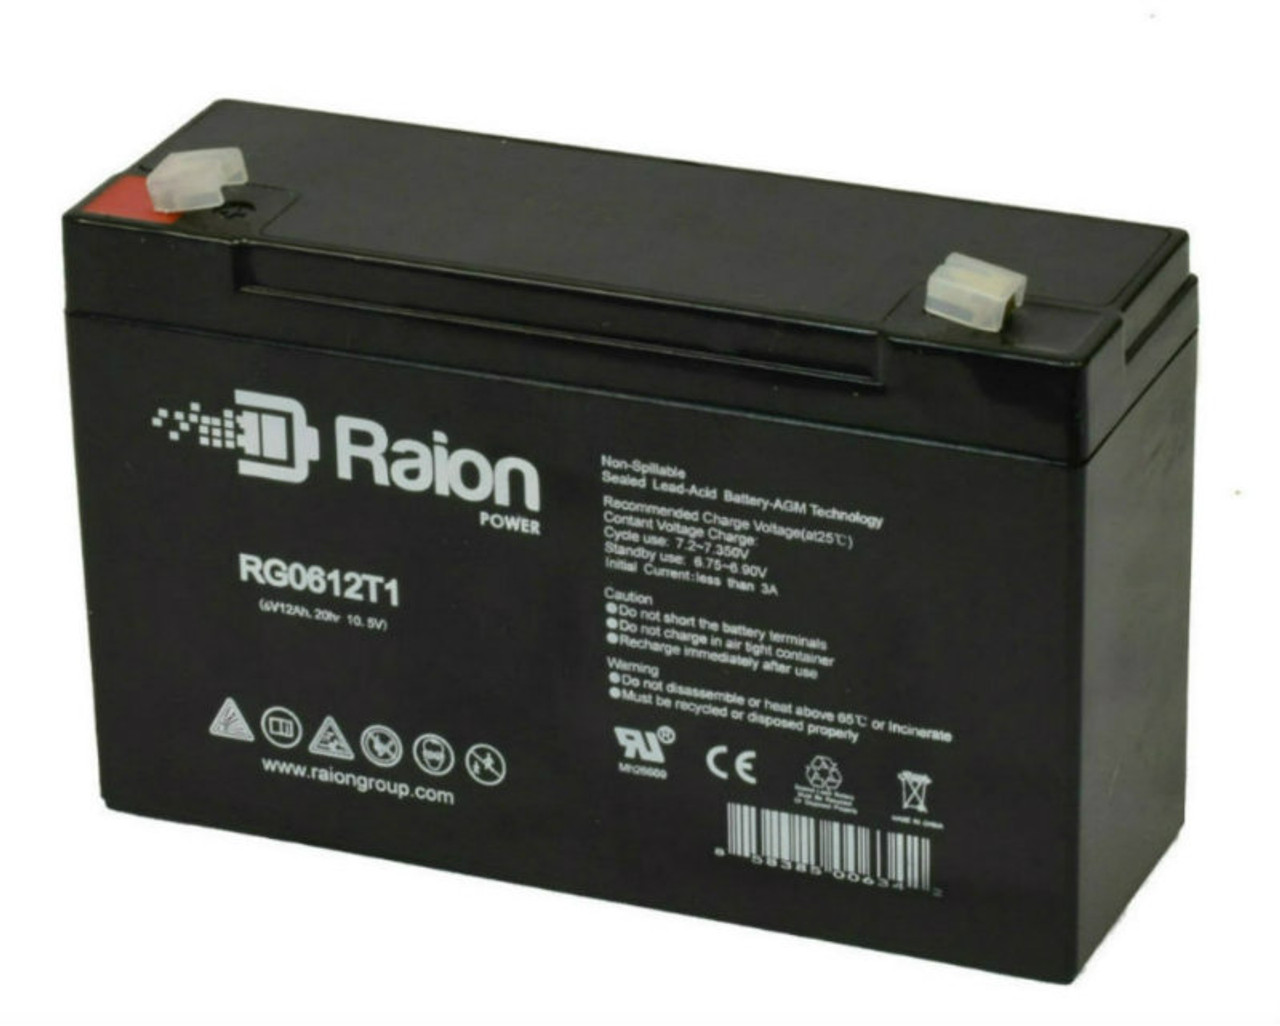 Raion Power RG06120T1 Replacement Battery for Streamlight SL40XI